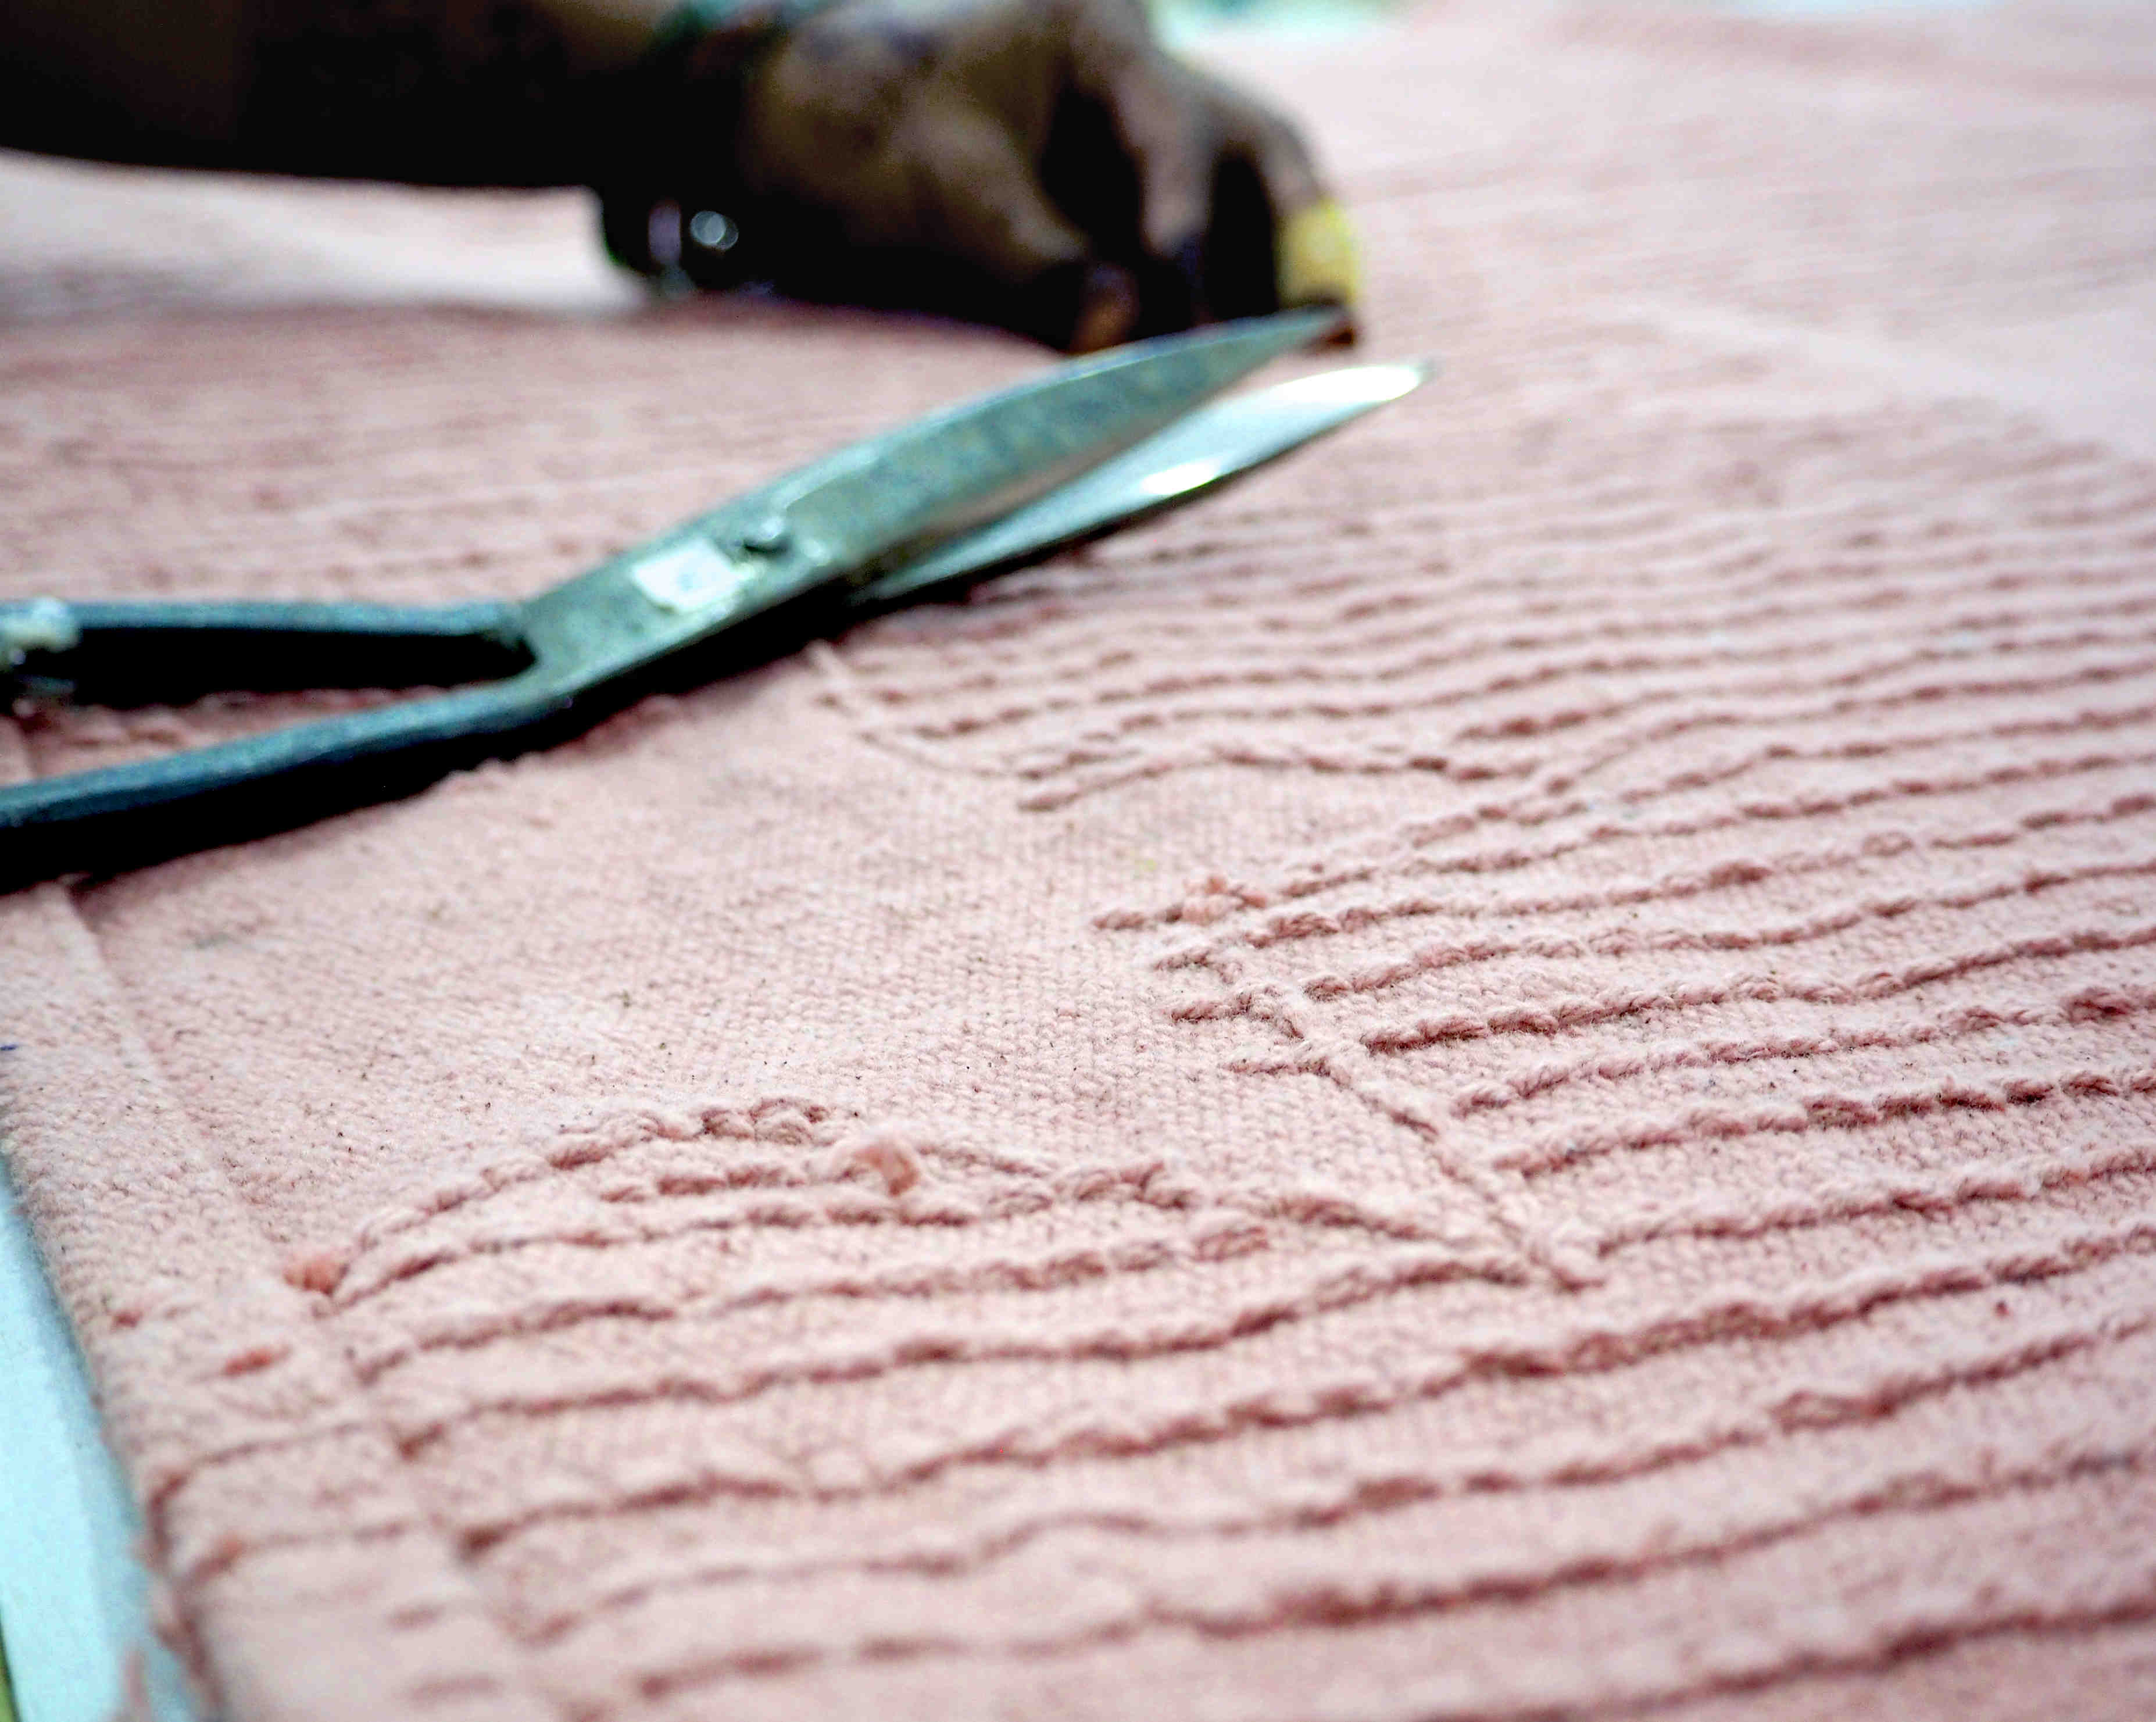 Rectangular pink cotton rug decorated with exposed stars and a tassel border.